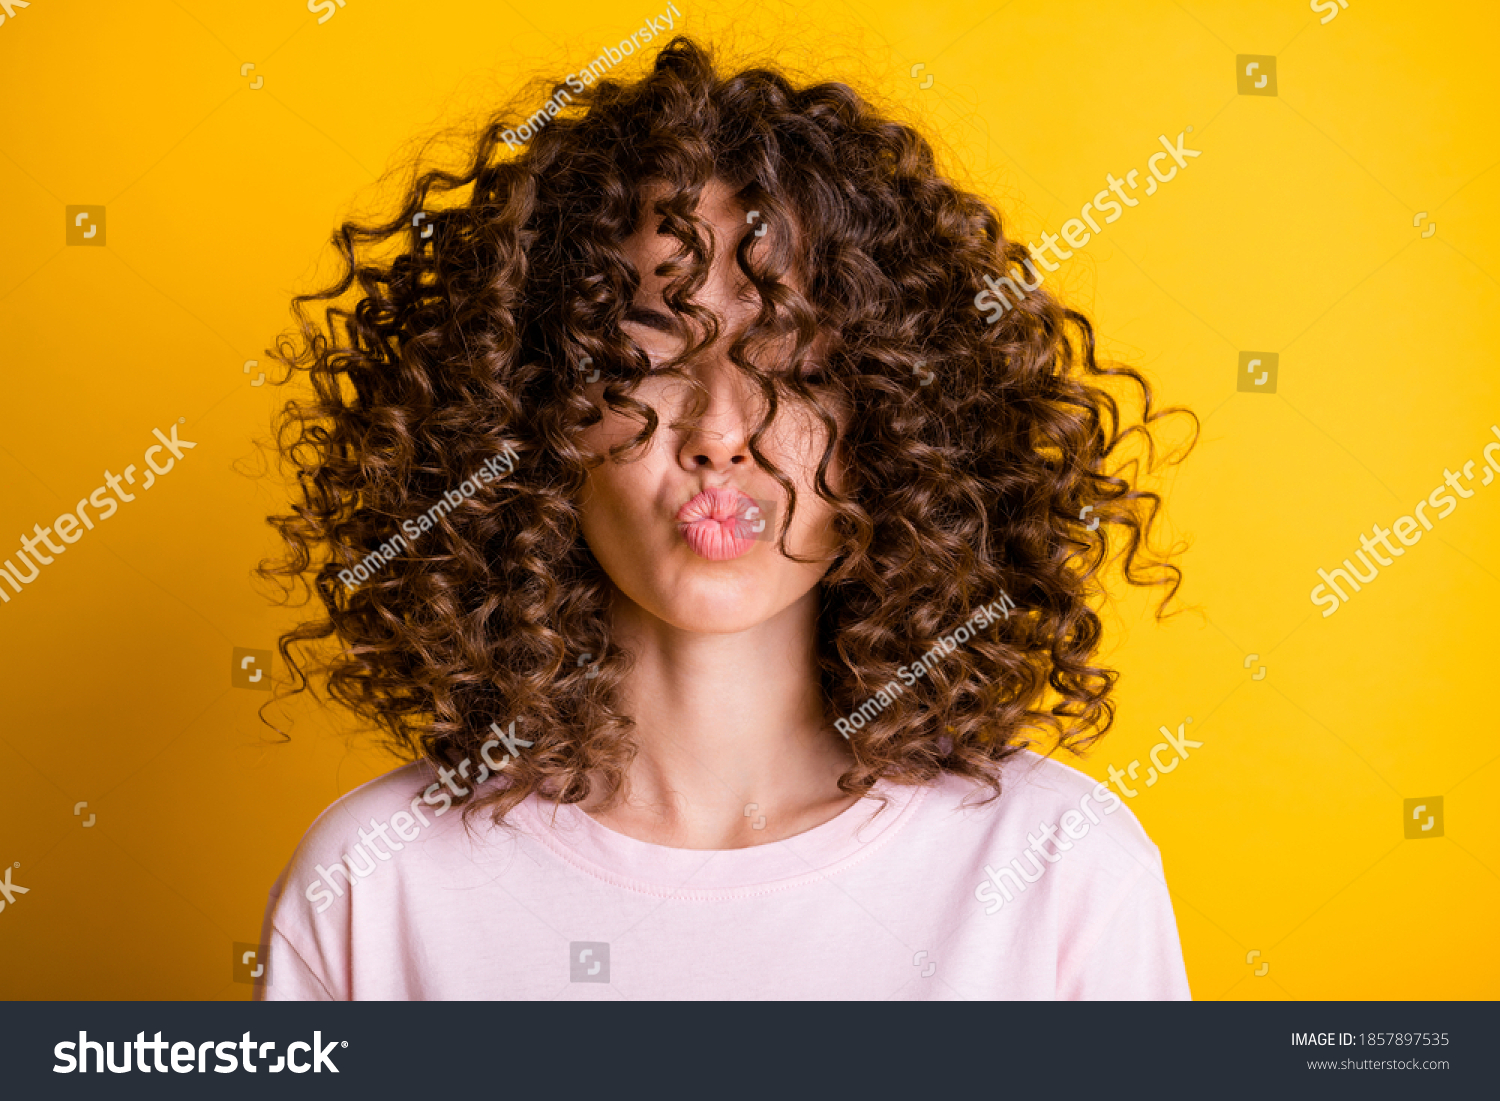 Headshot of girl with curly hairstyle wearing t-shirt send air kiss pouted lips isolated on vivid yellow color background #1857897535